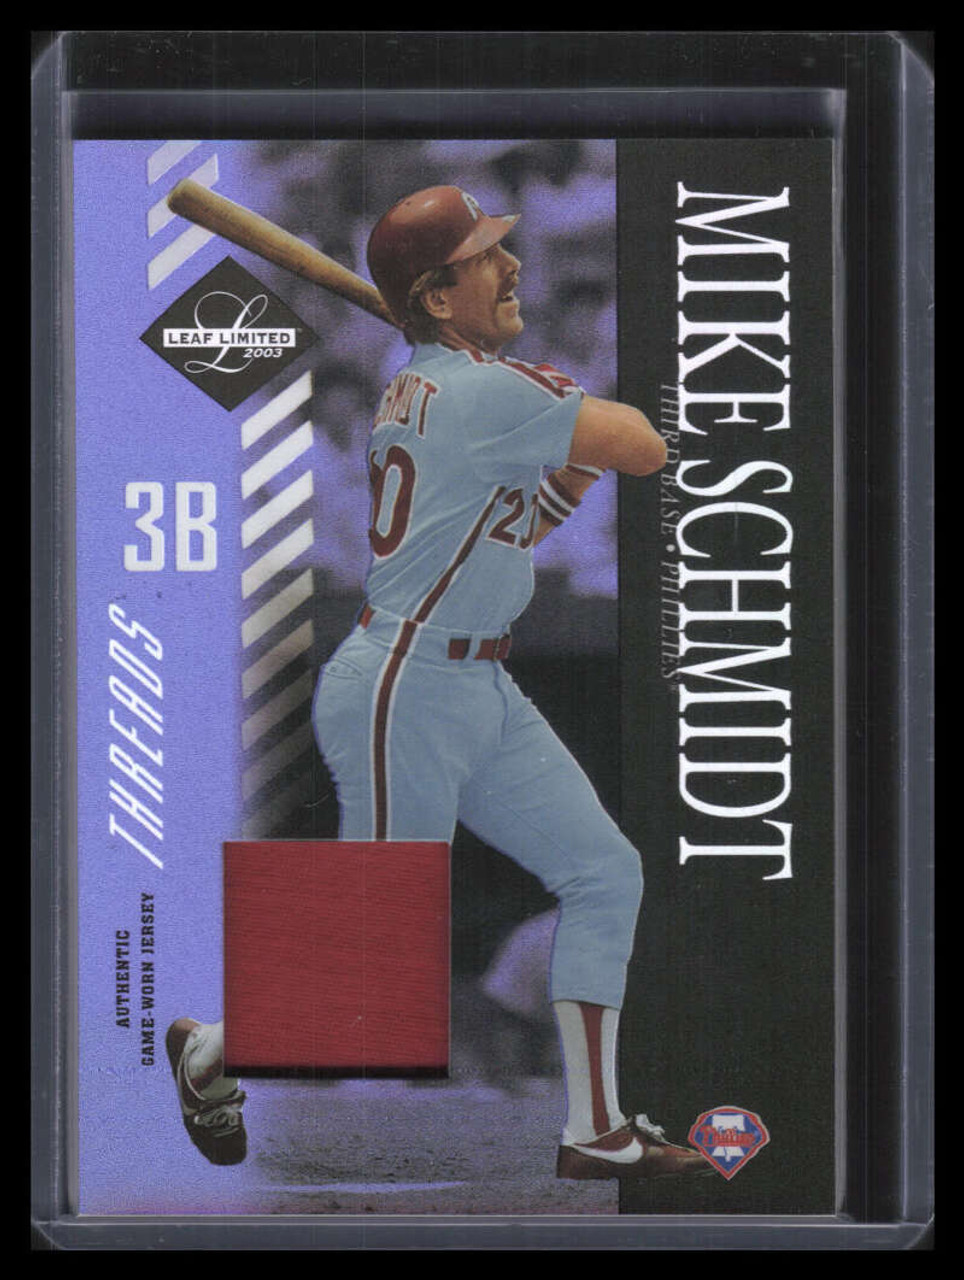 2003 Leaf Limited Jersey Numbers 46 Mike Schmidt Jersey 25/50 - Sportsnut  Cards